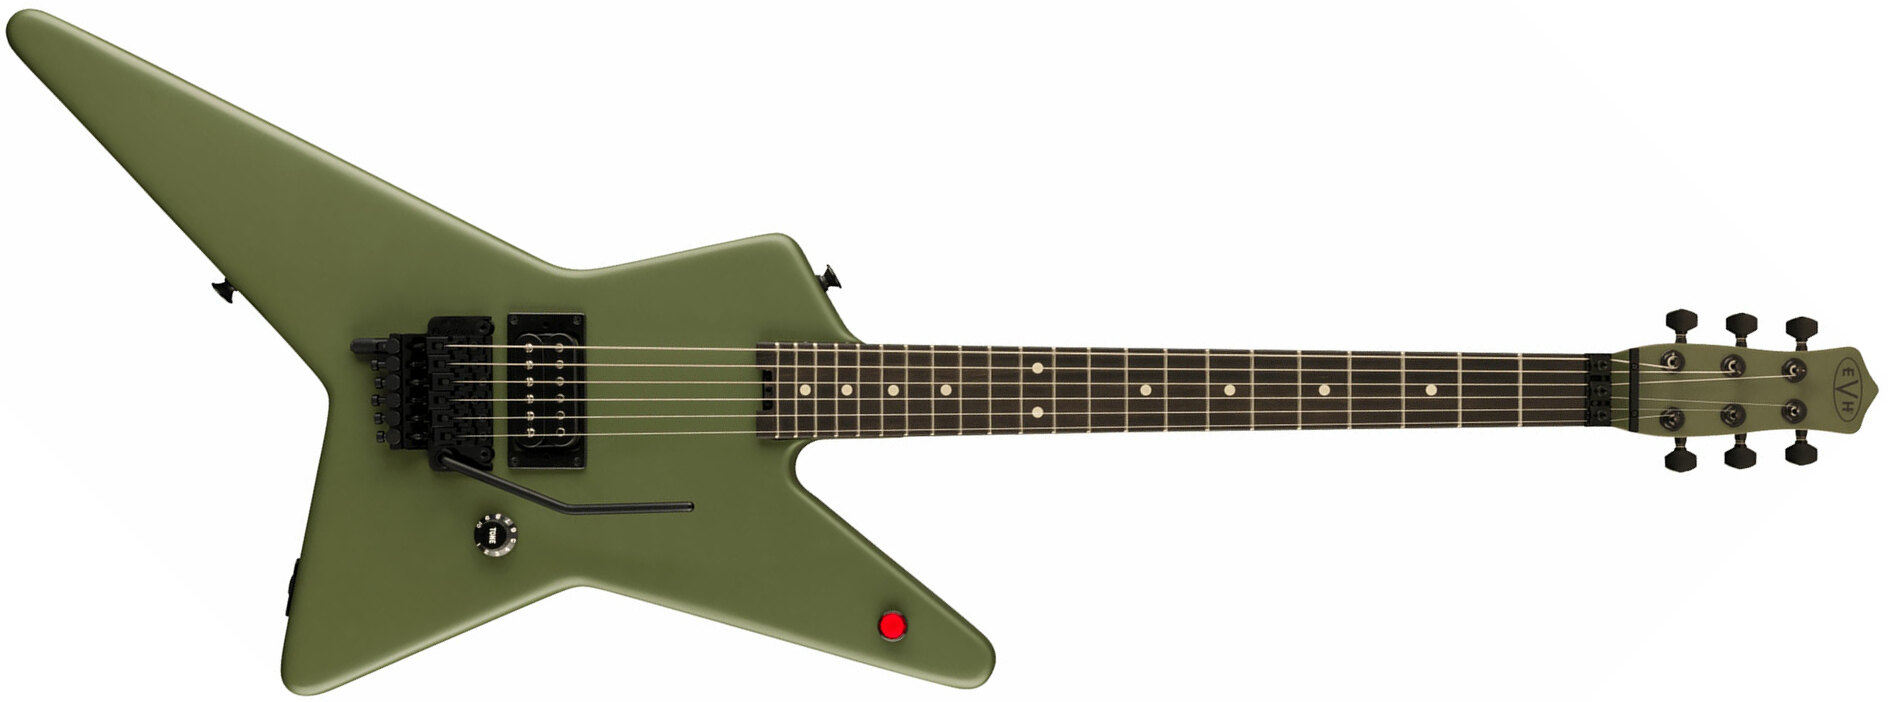 Evh Star Limited Edition 1h Fr Eb - Matte Army Drab - Guitarra electrica metalica - Main picture